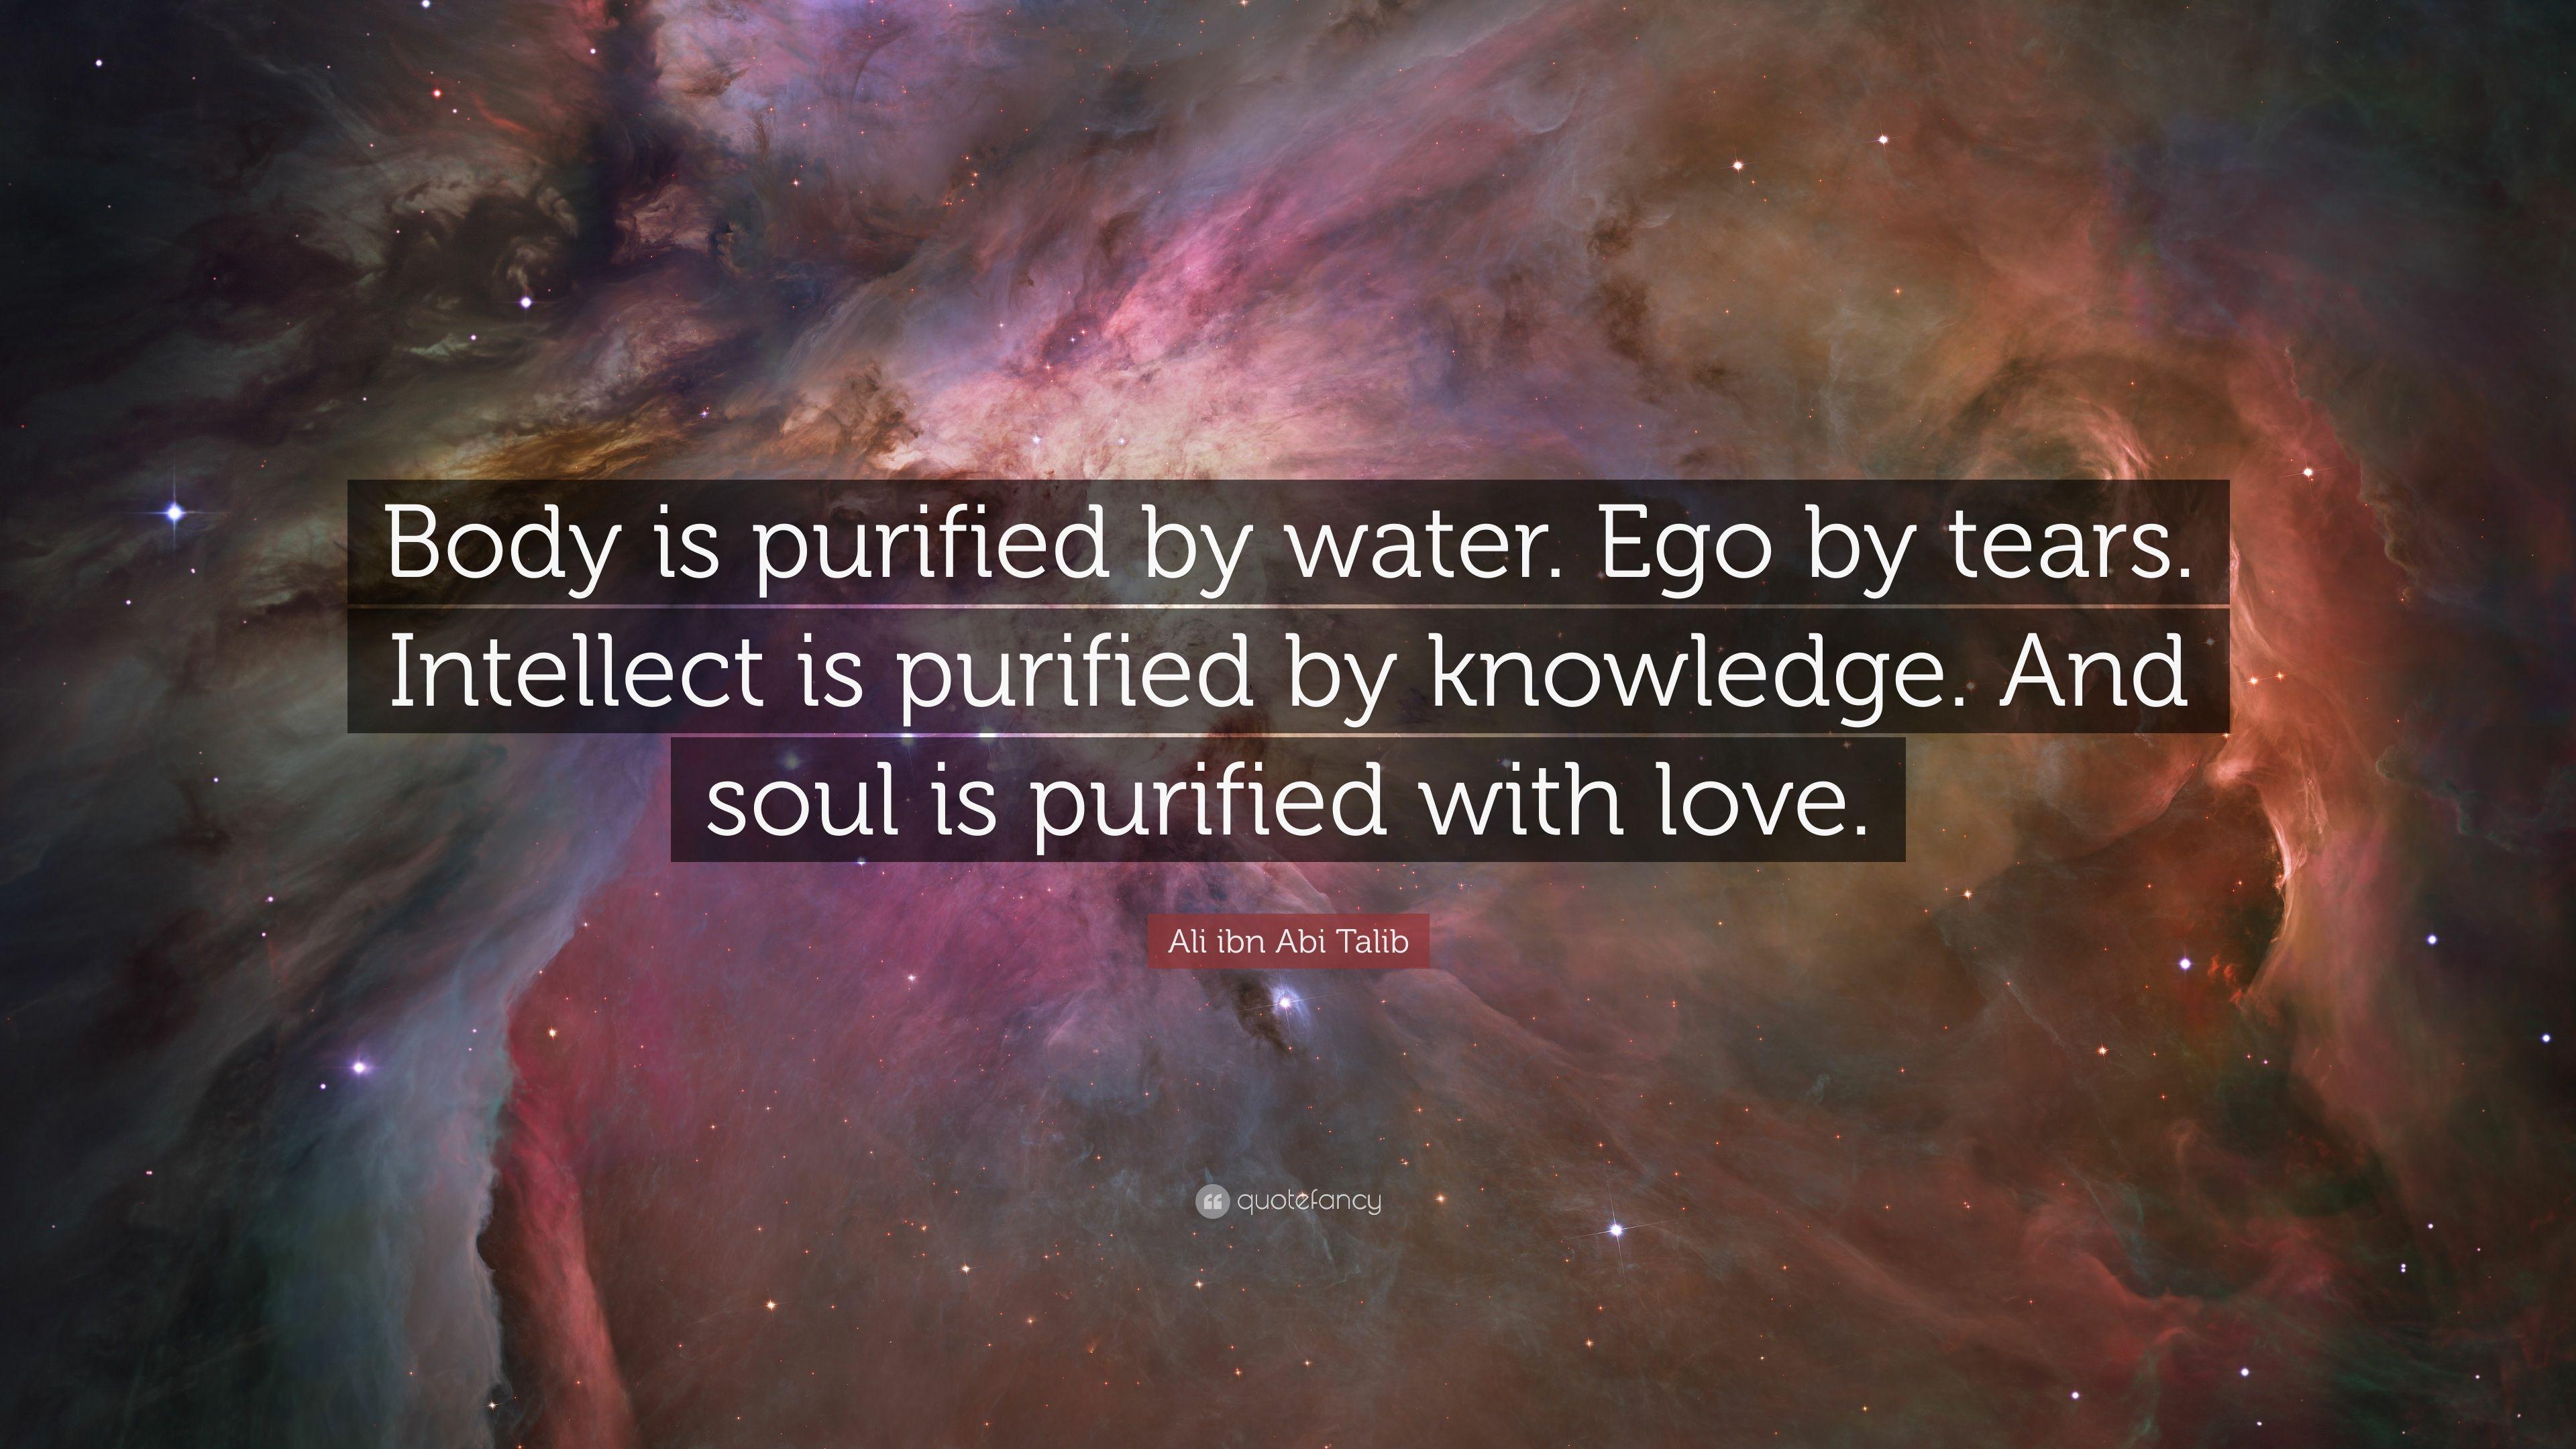 Ali ibn Abi Talib Quote: “Body is purified by water. Ego